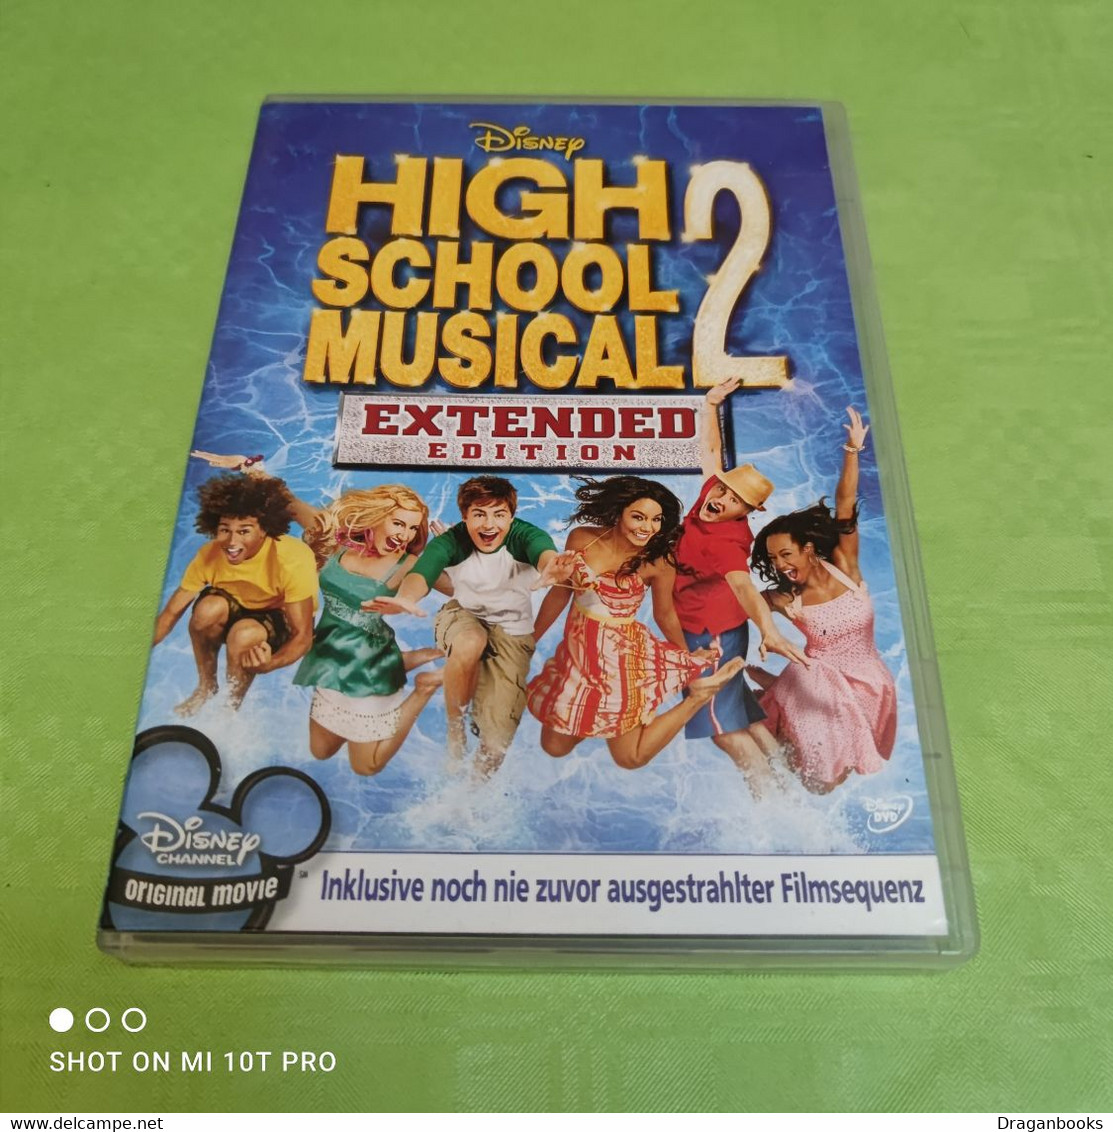 High School Musical 2 - Extended Edition - Musicals